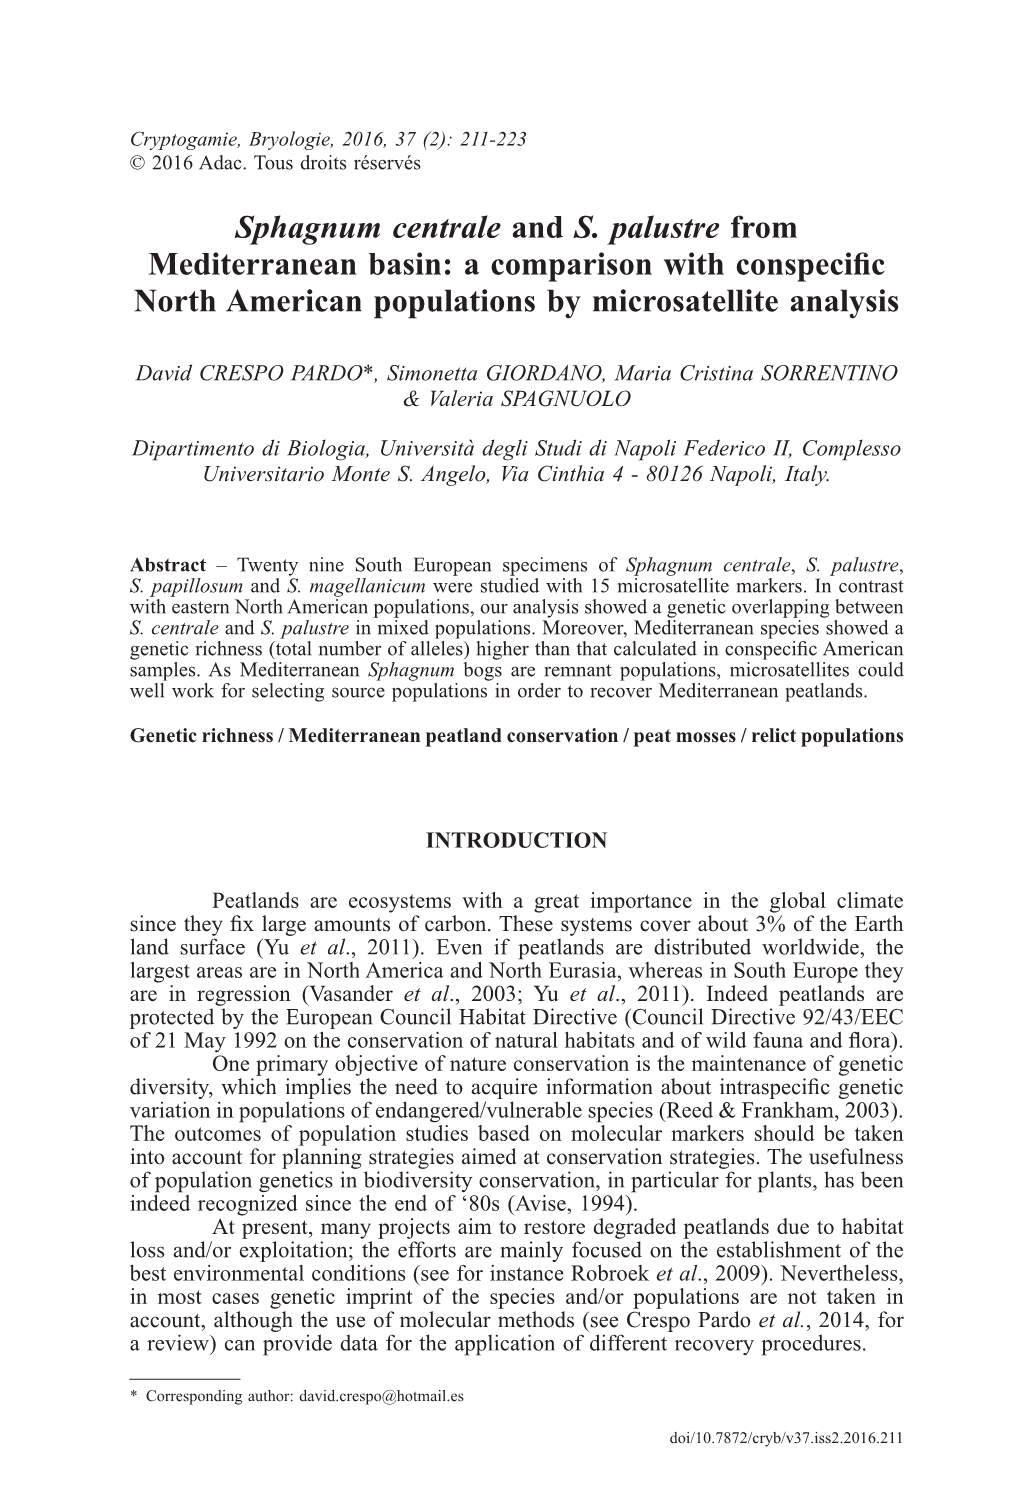 Sphagnum Centrale and S. Palustre from Mediterranean Basin: a Comparison with Conspecific North American Populations by Microsatellite Analysis